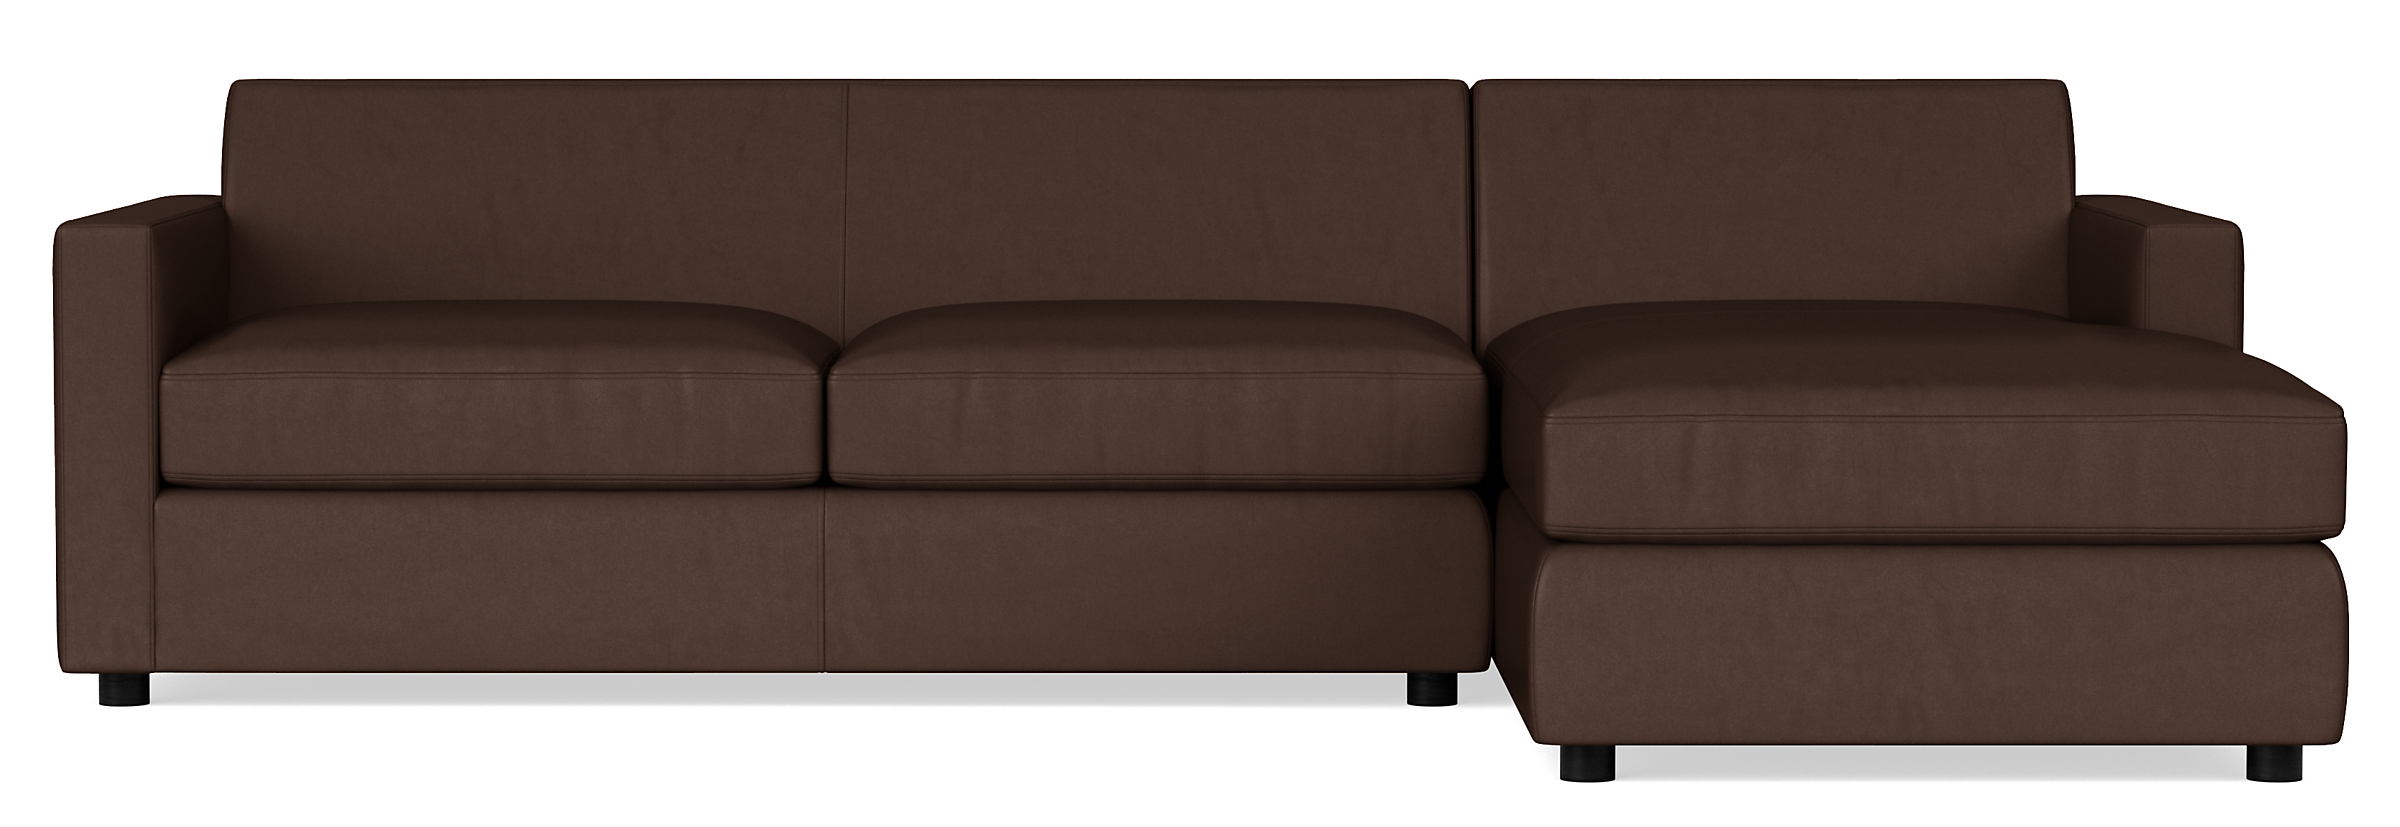 Alex Leather Sofas with Chaise